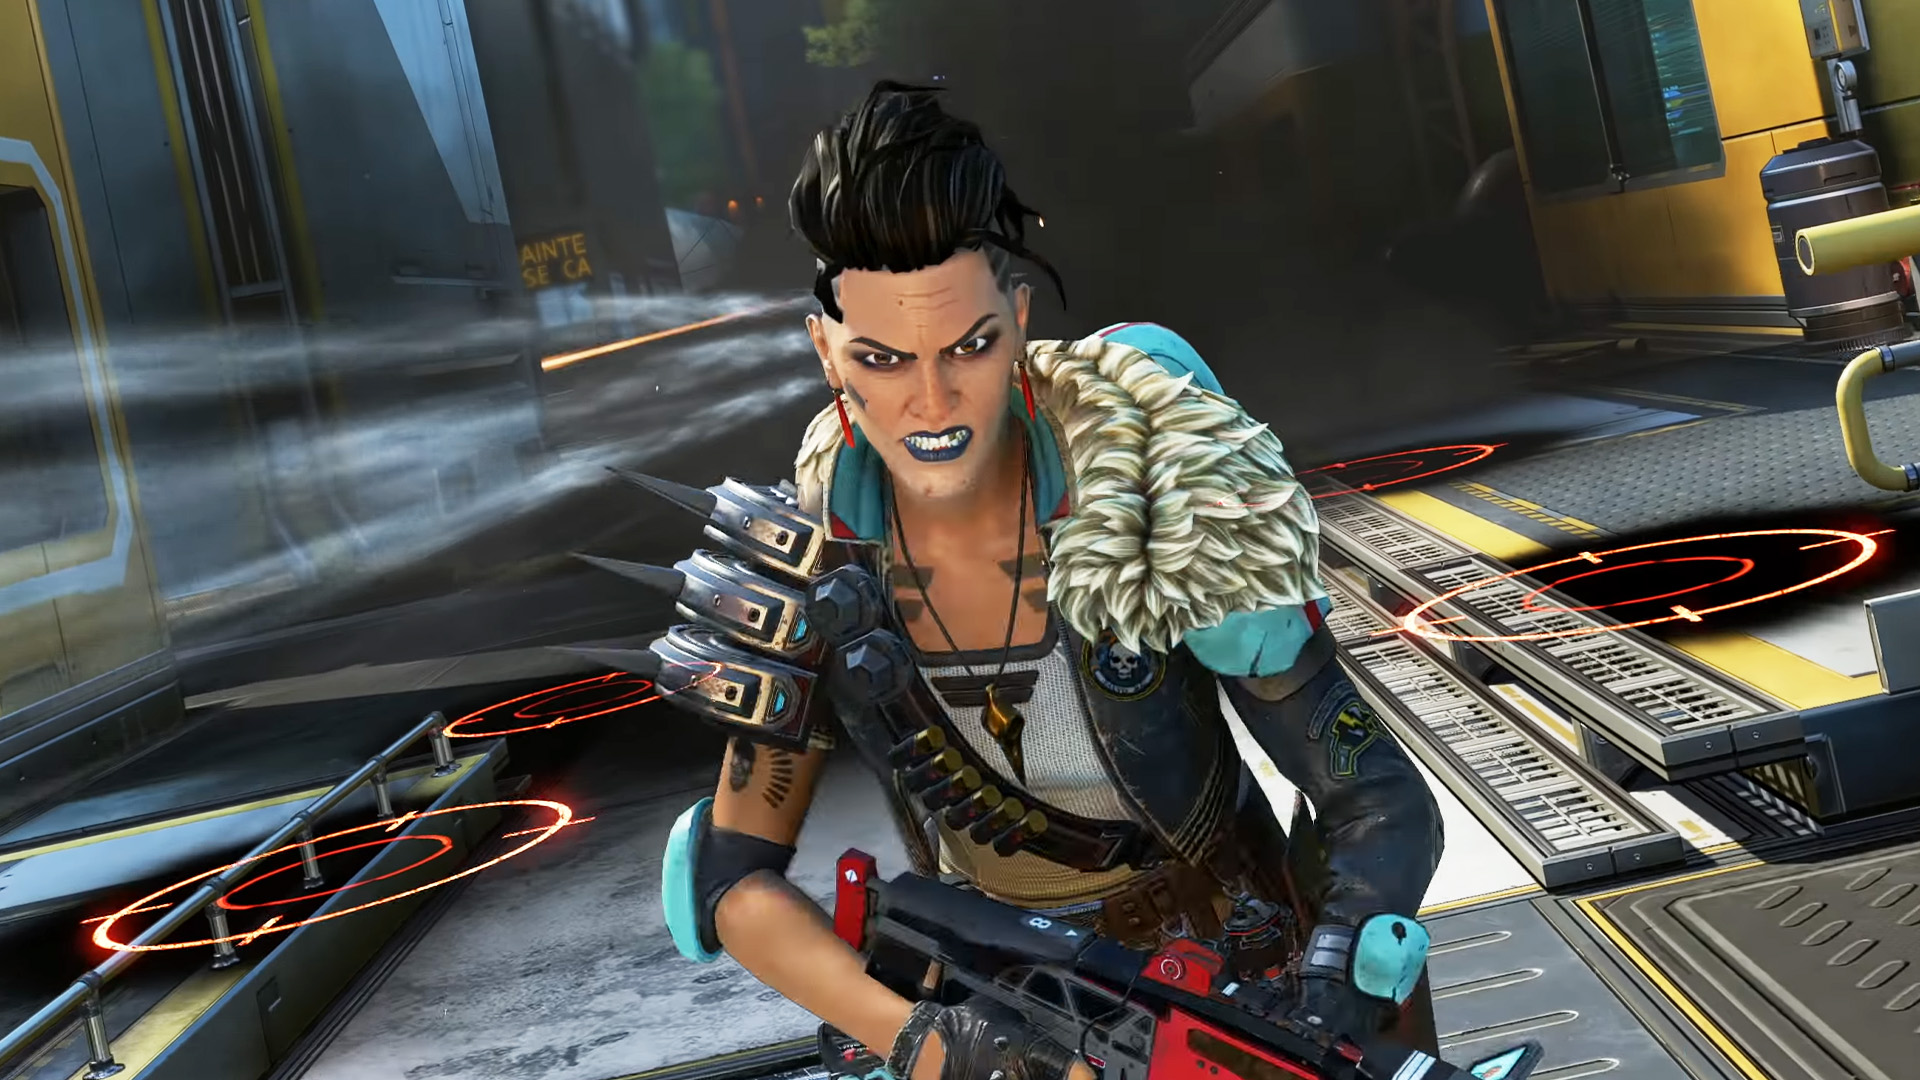 Apex Legends' new character, Mad Maggie, has a dark history